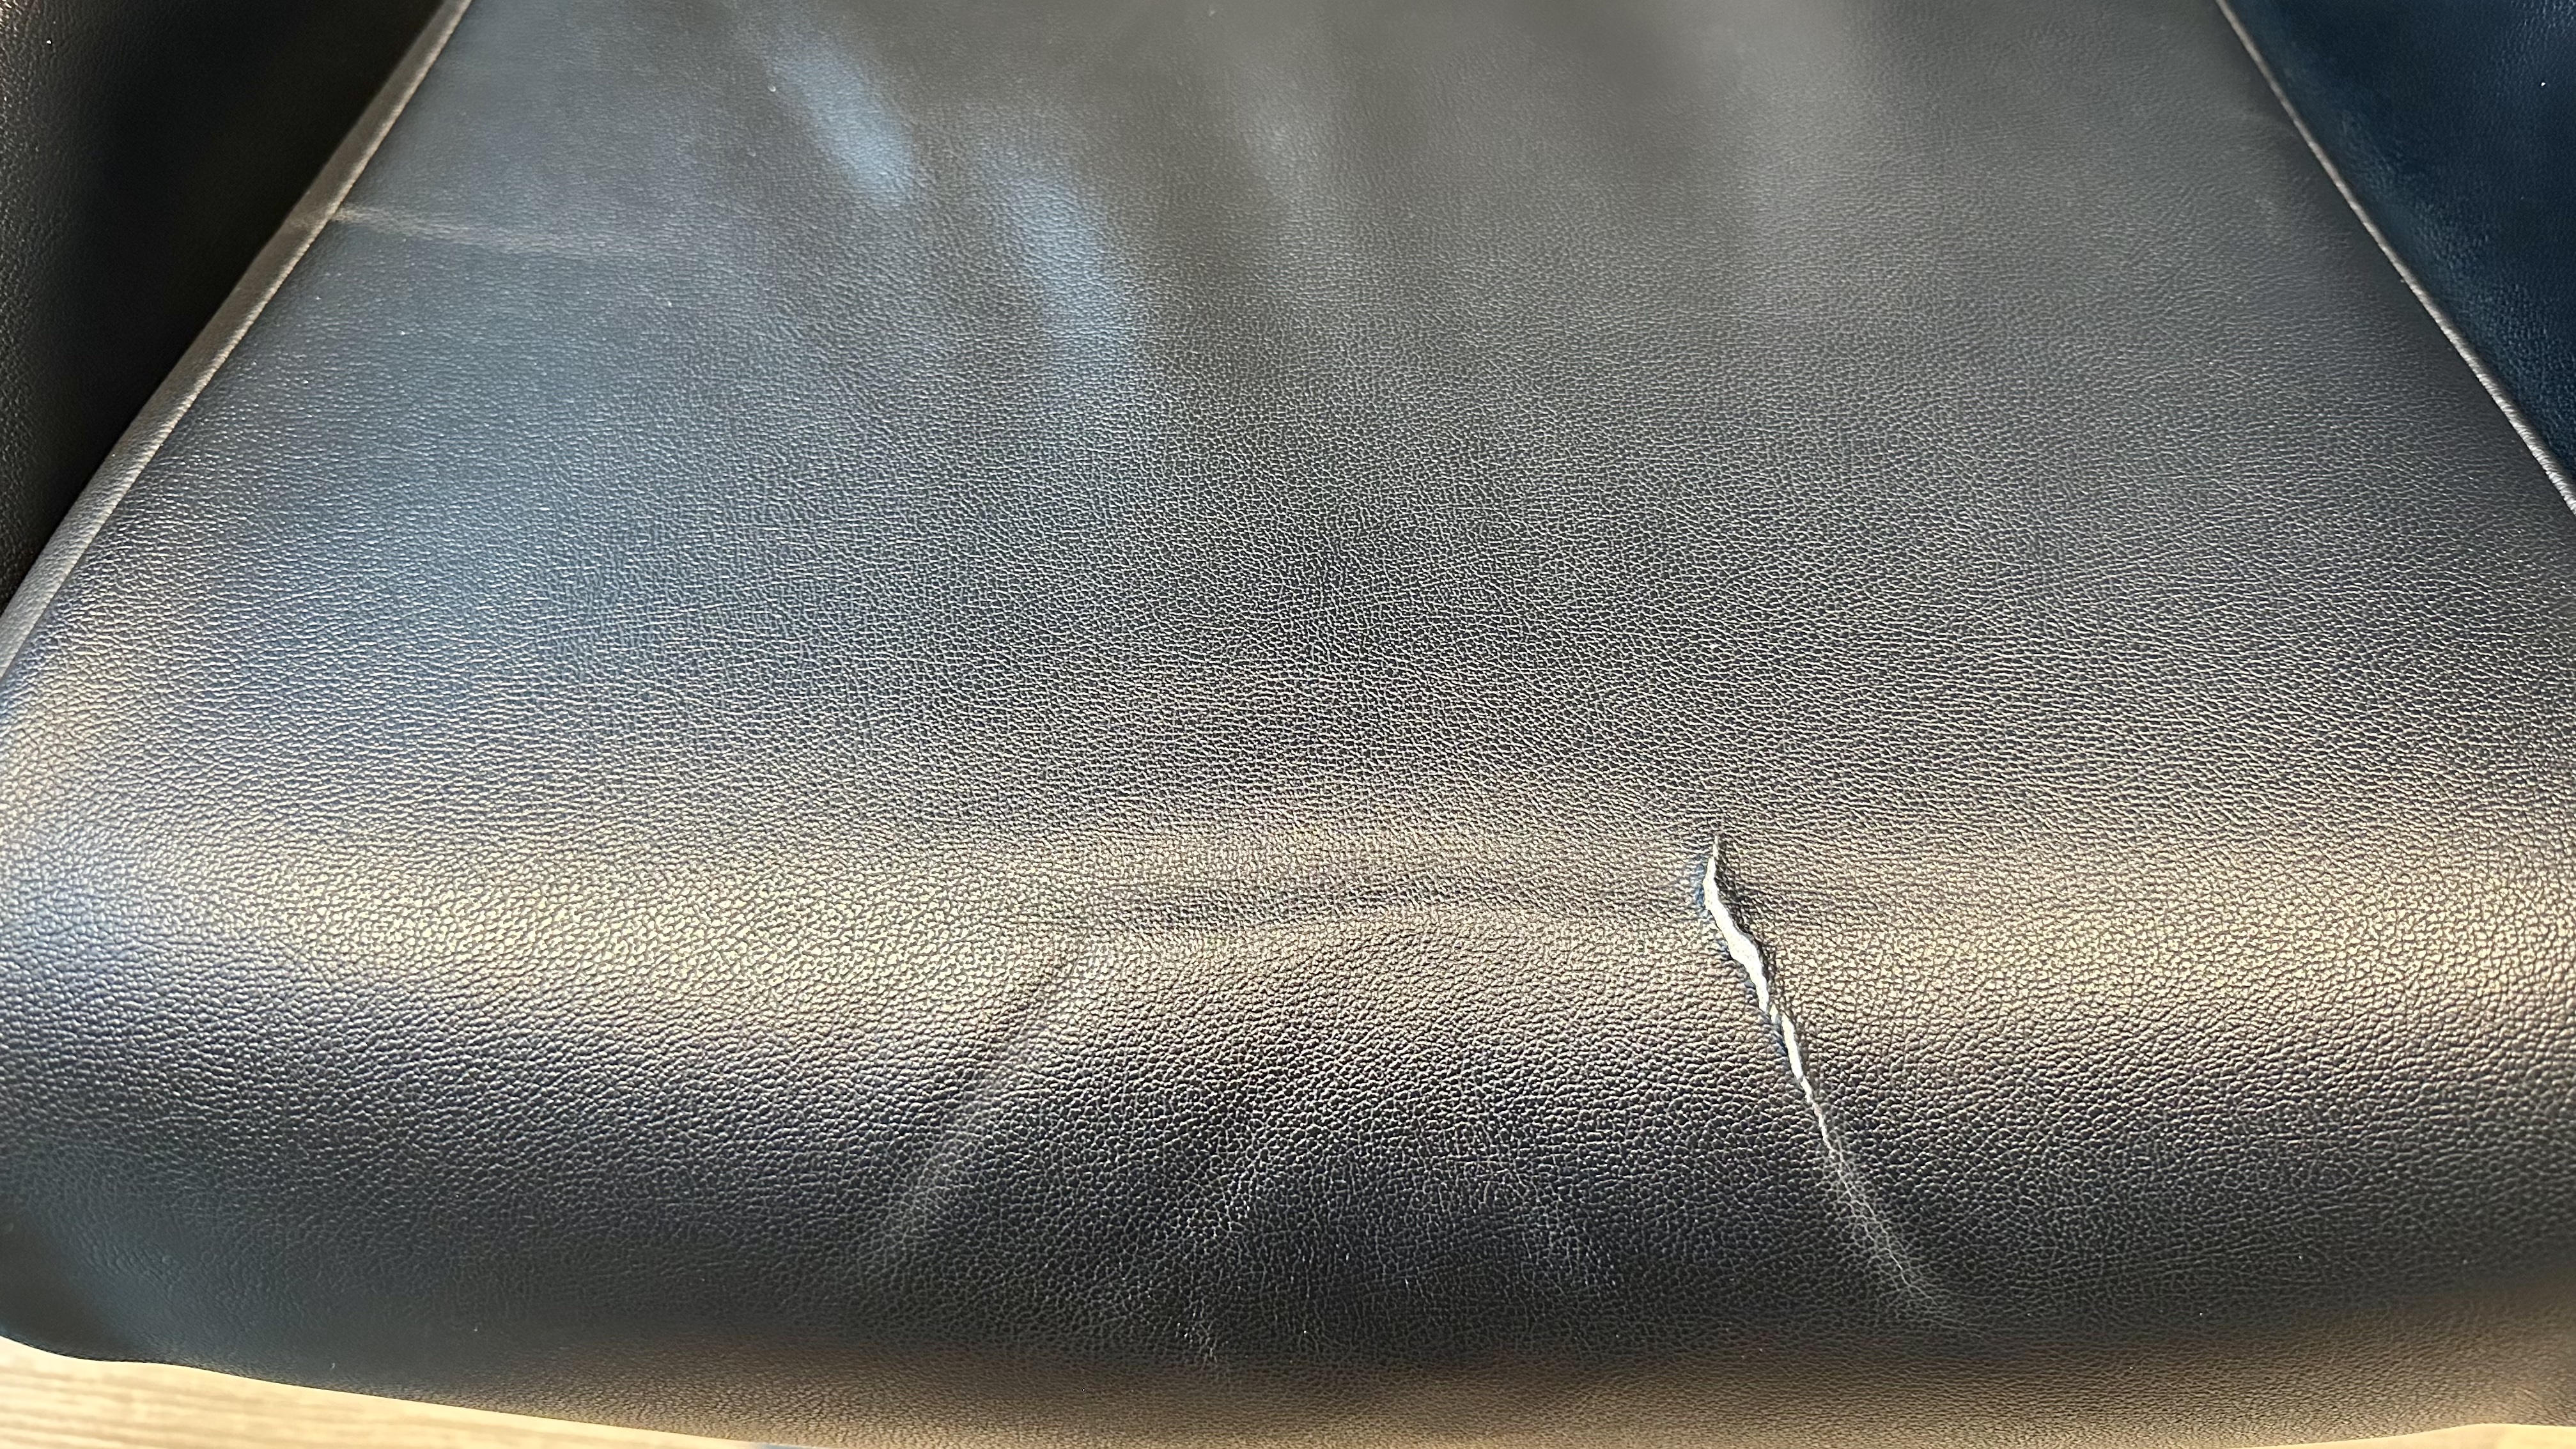 A cracked gamer chair seat